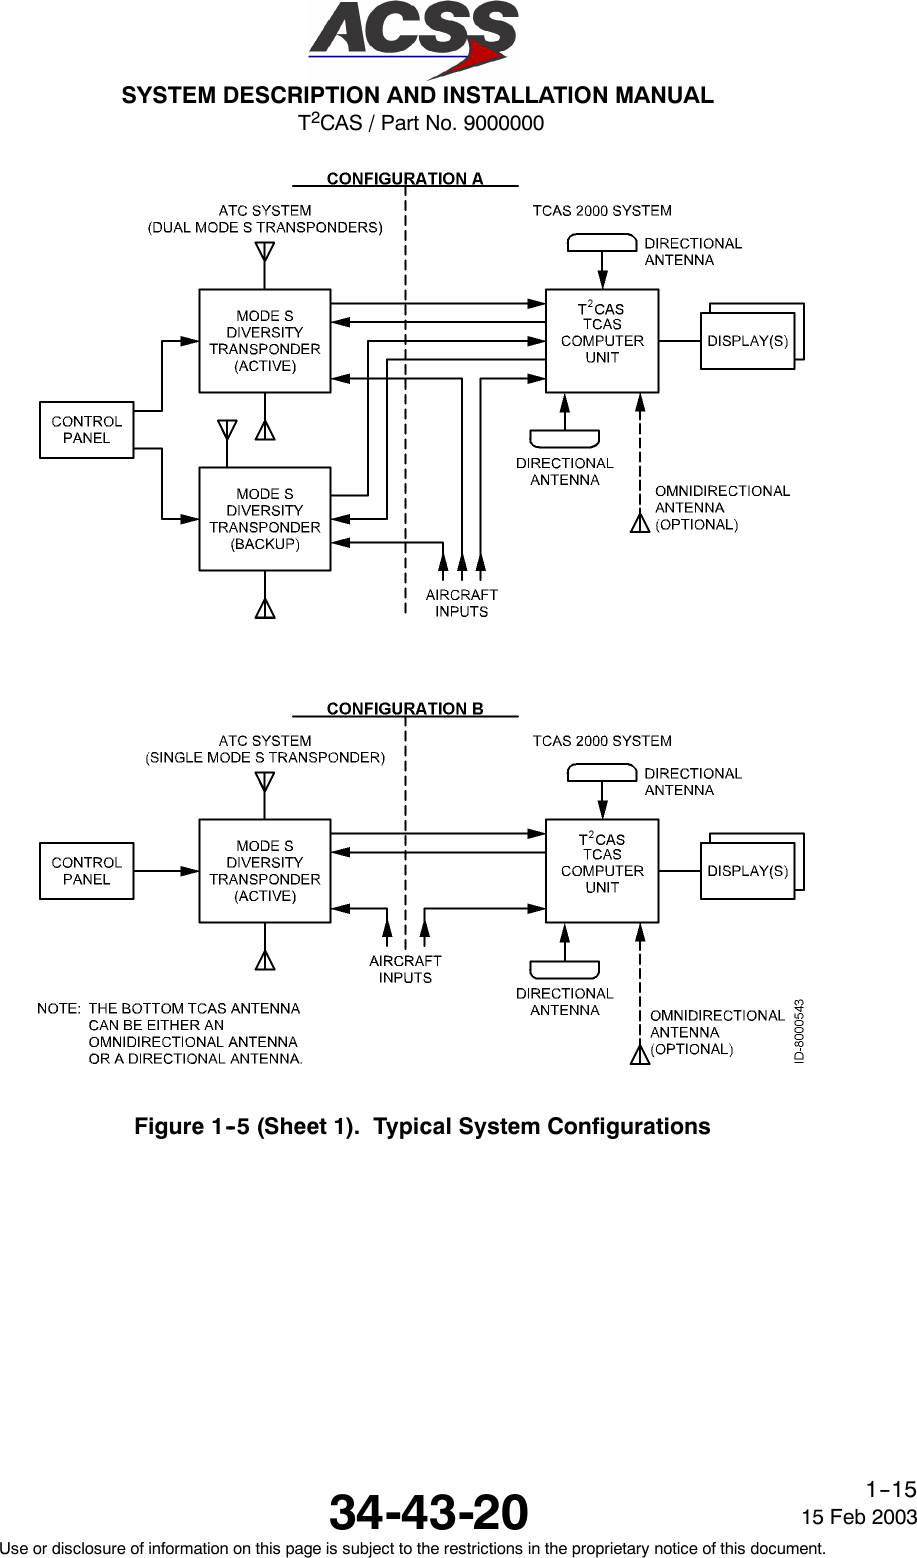 T2CAS / Part No. 9000000SYSTEM DESCRIPTION AND INSTALLATION MANUAL34-43-20 15 Feb 2003Use or disclosure of information on this page is subject to the restrictions in the proprietary notice of this document.1--15Figure 1--5 (Sheet 1). Typical System Configurations